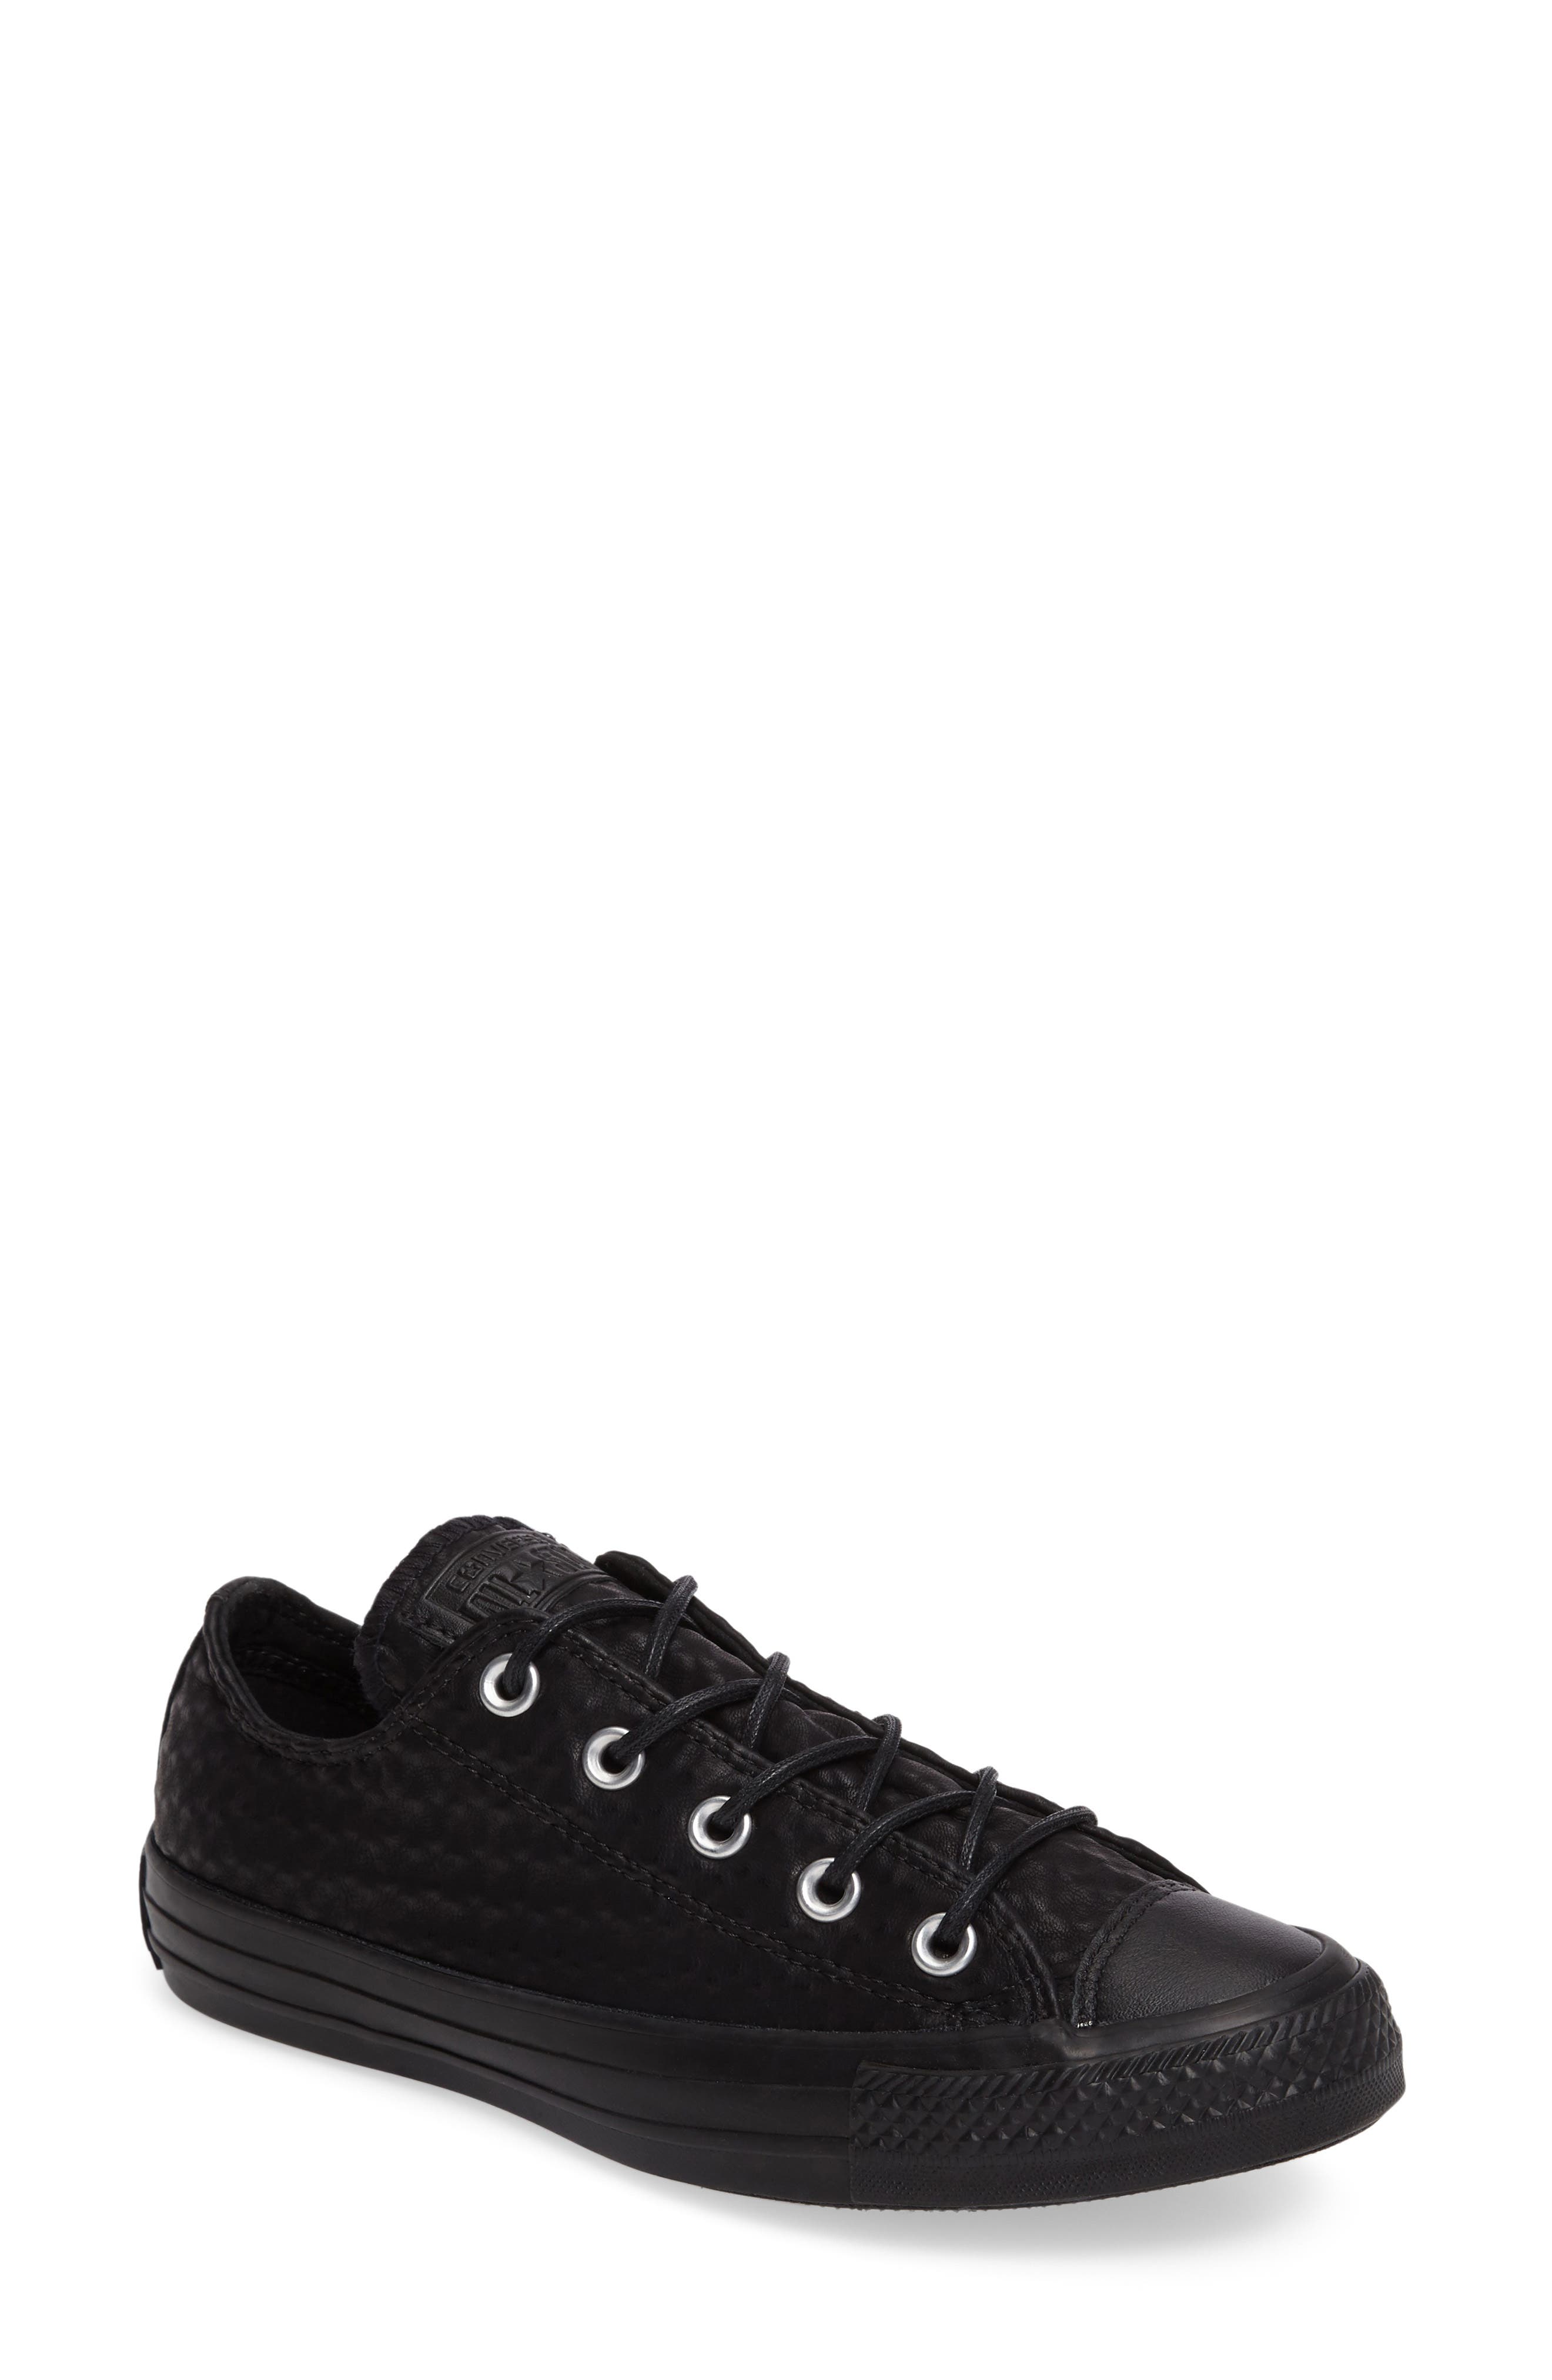 converse all star ox black leather